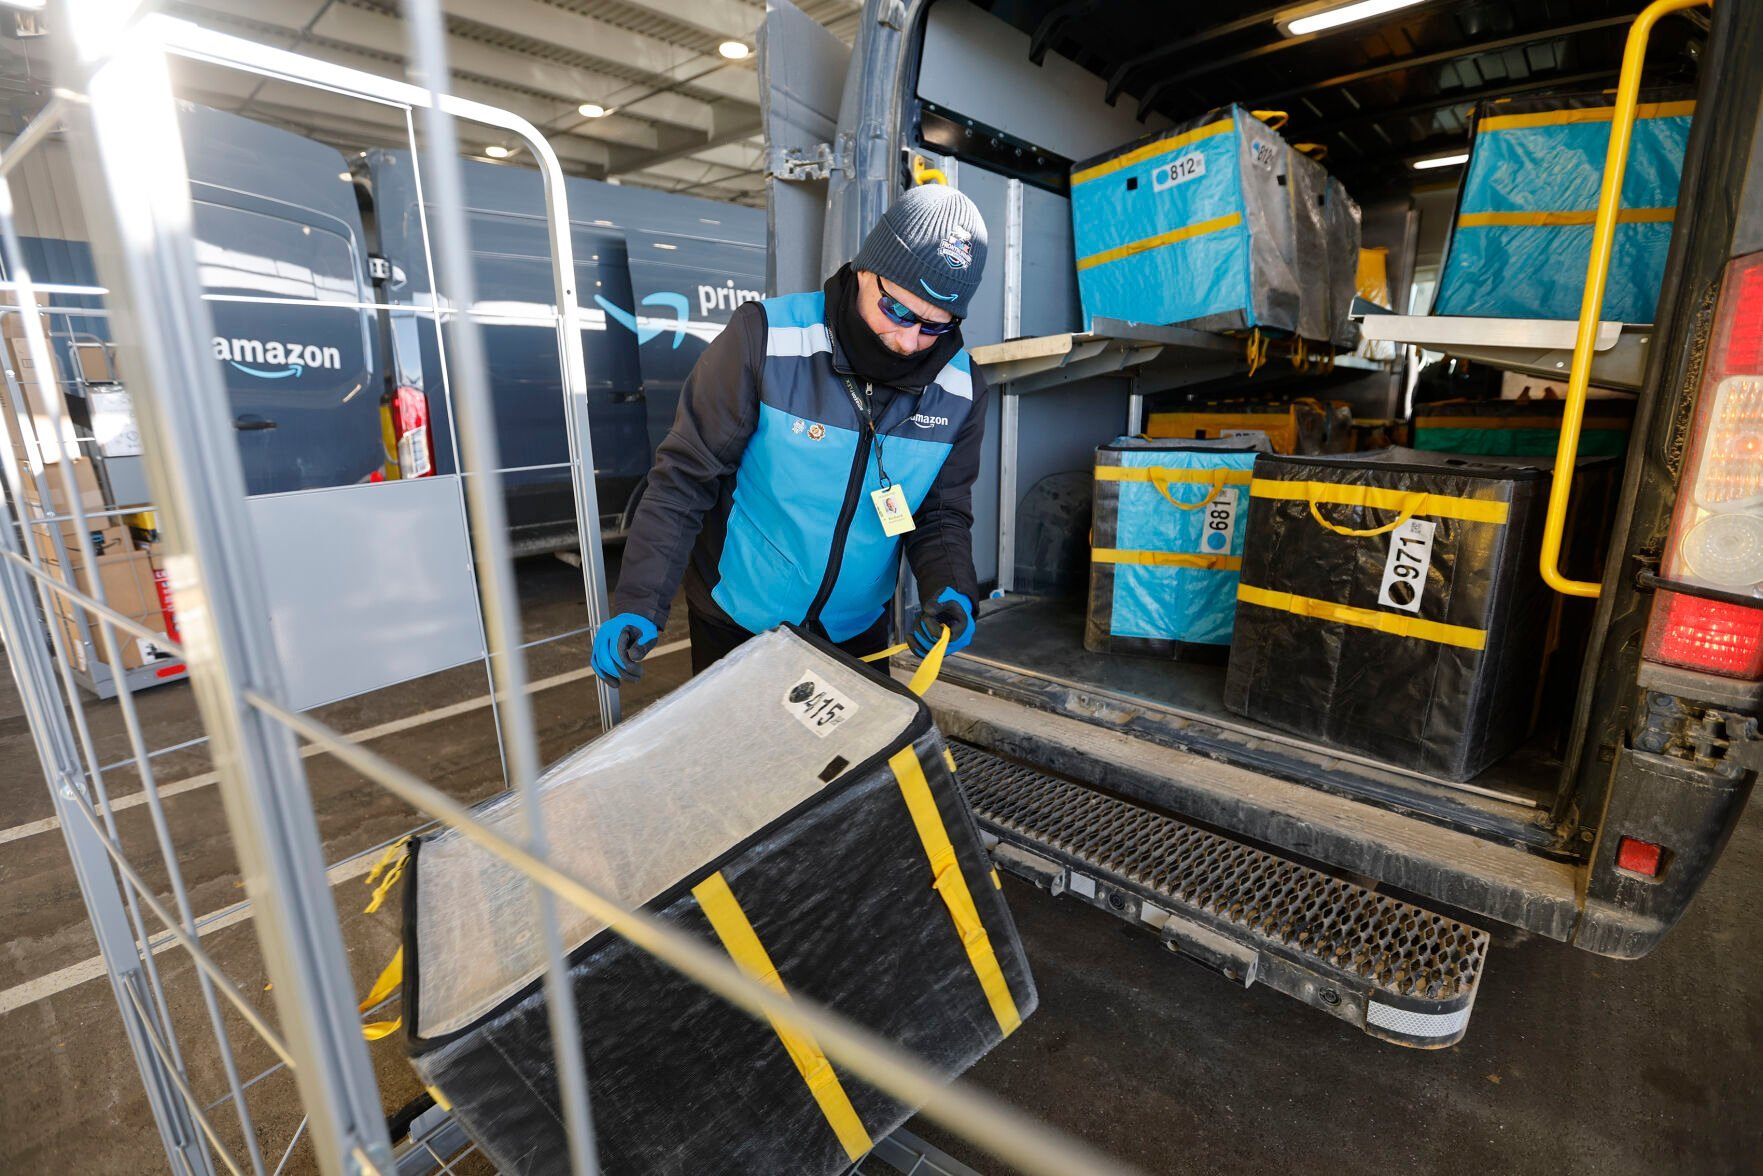 Richard Waddington loads packages into vehicles at Amazon in Dubuque on Tuesday, Feb. 21, 2023.    PHOTO CREDIT: JESSICA REILLY